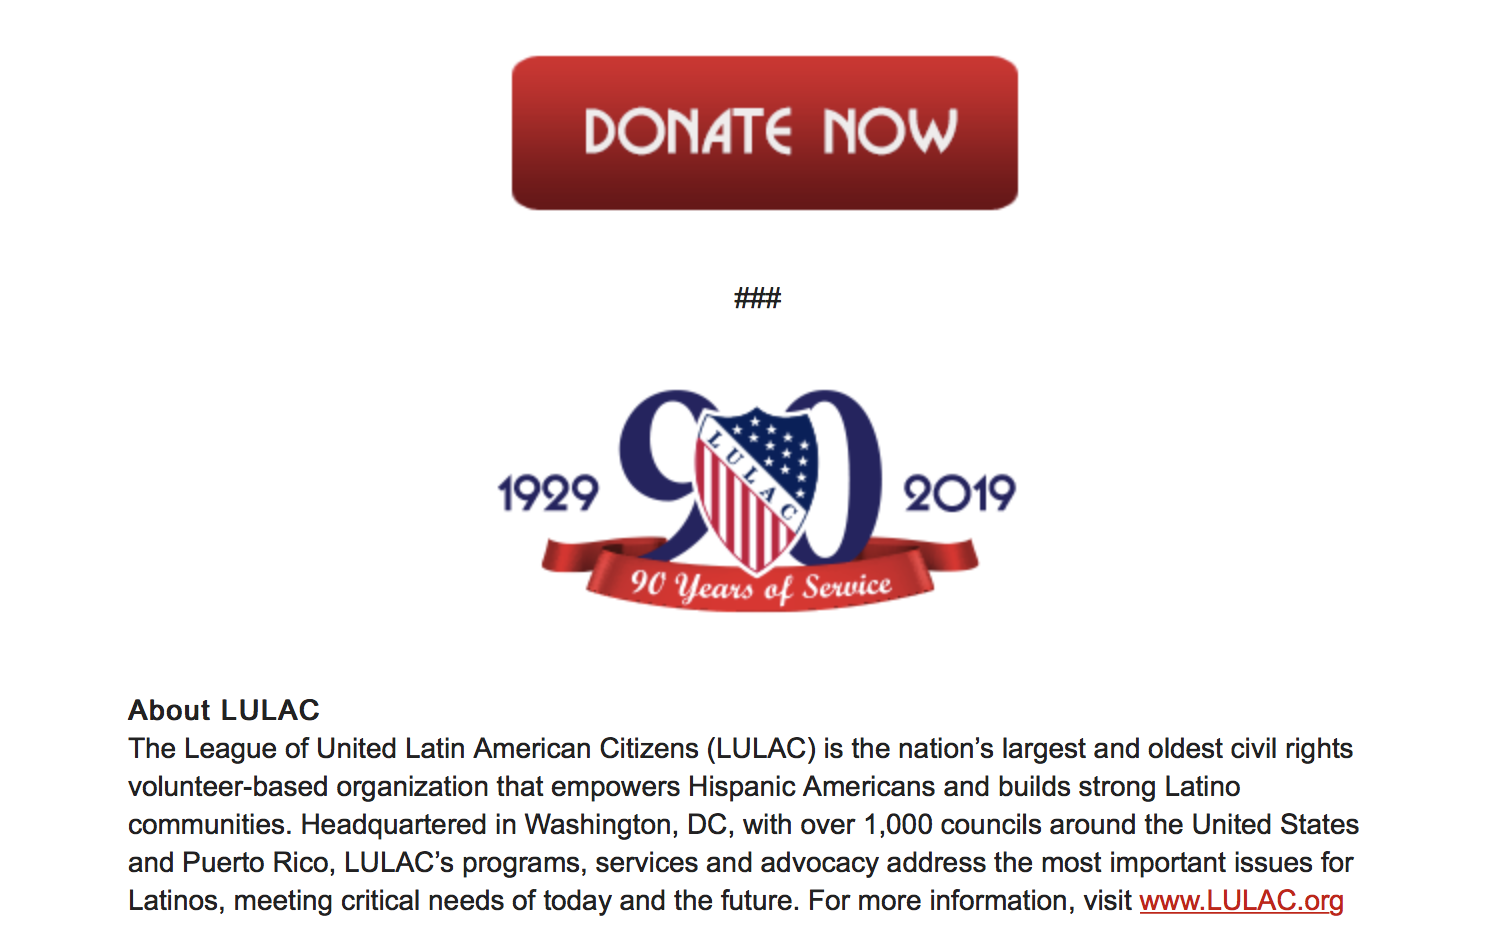 Return Of Government Workers - LULAC DONATE